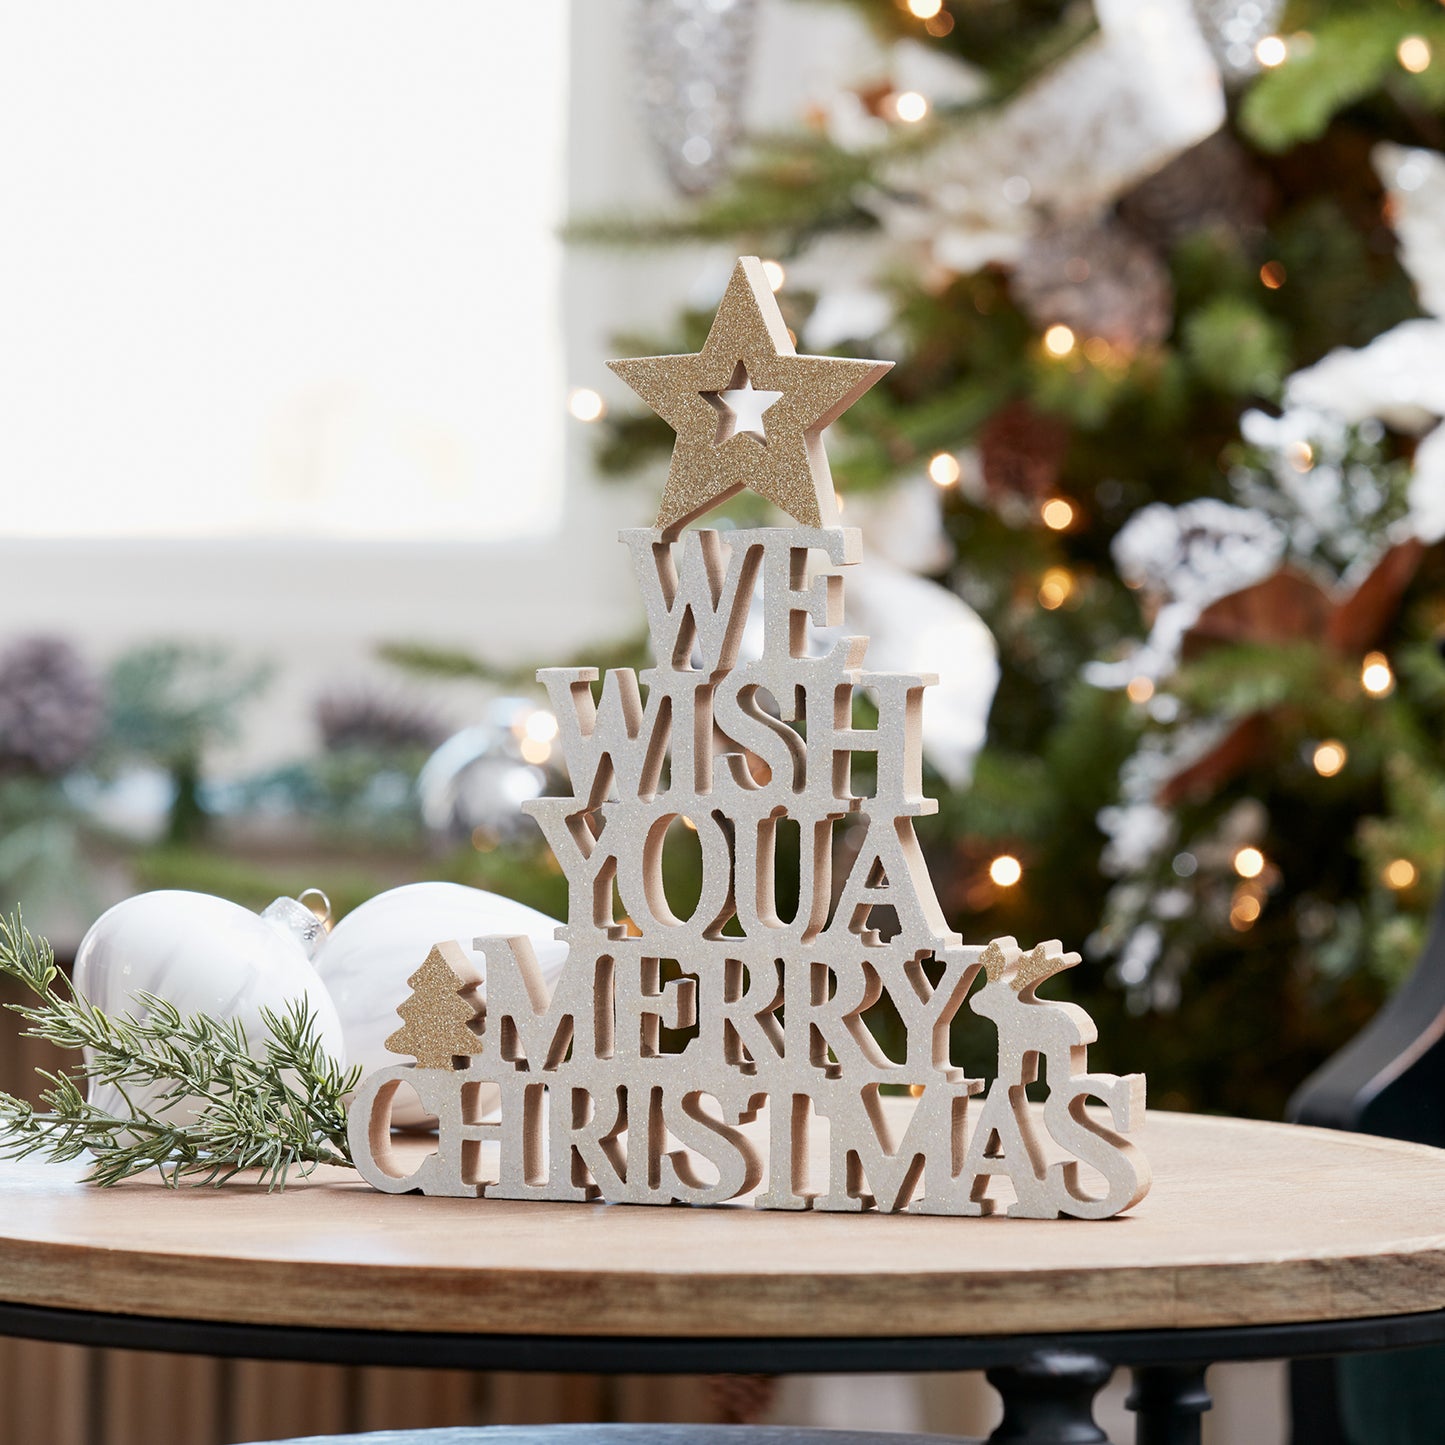 We Wish You A Merry Christmas 10"L x 11.25"H Wooden Sign